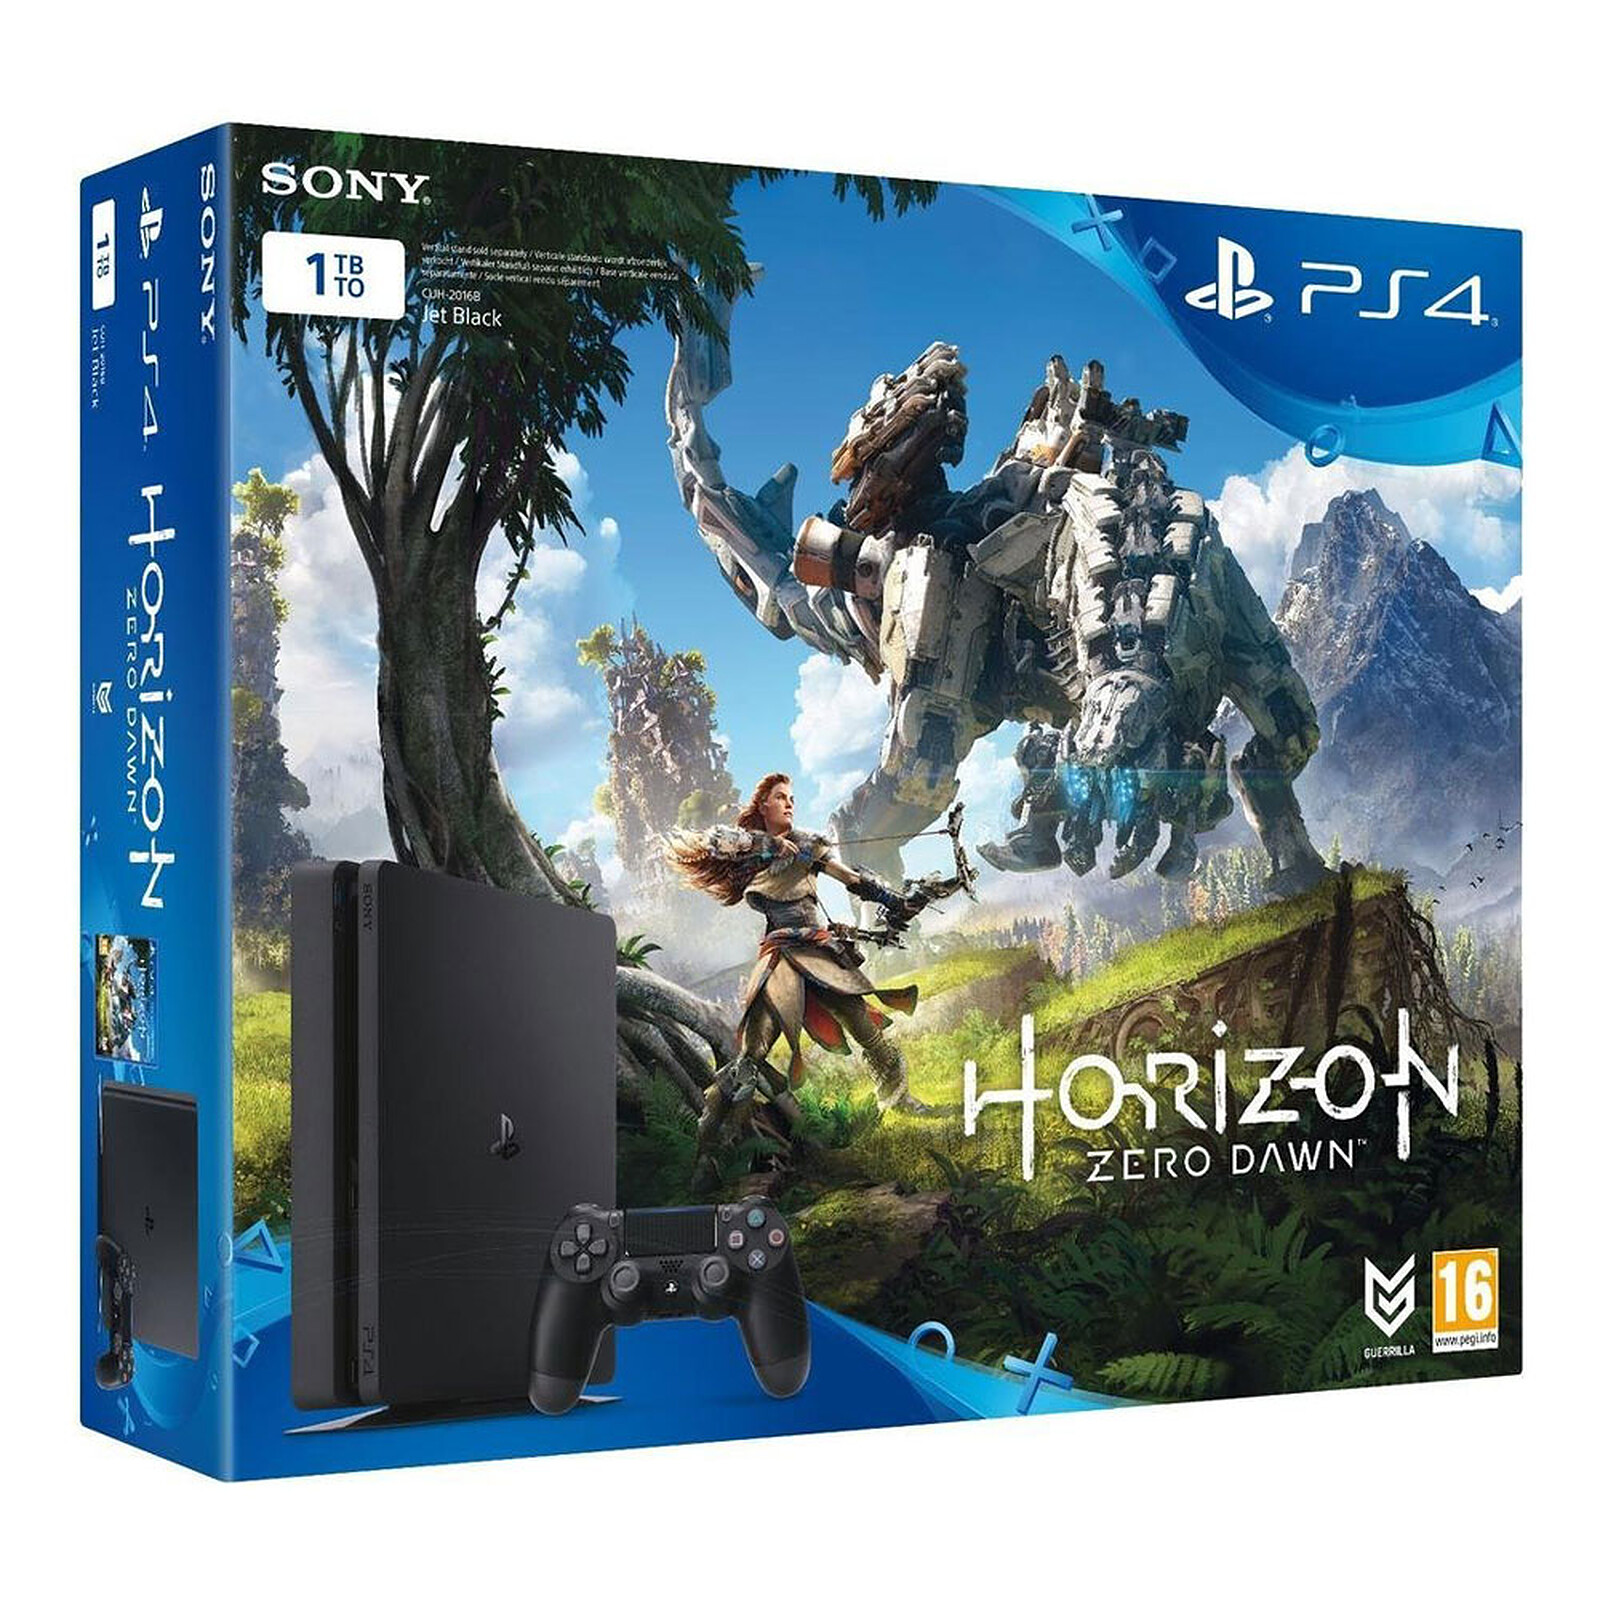 Sony PlayStation 4 Slim (1 To) - Console PS4 - Garantie 3 ans LDLC